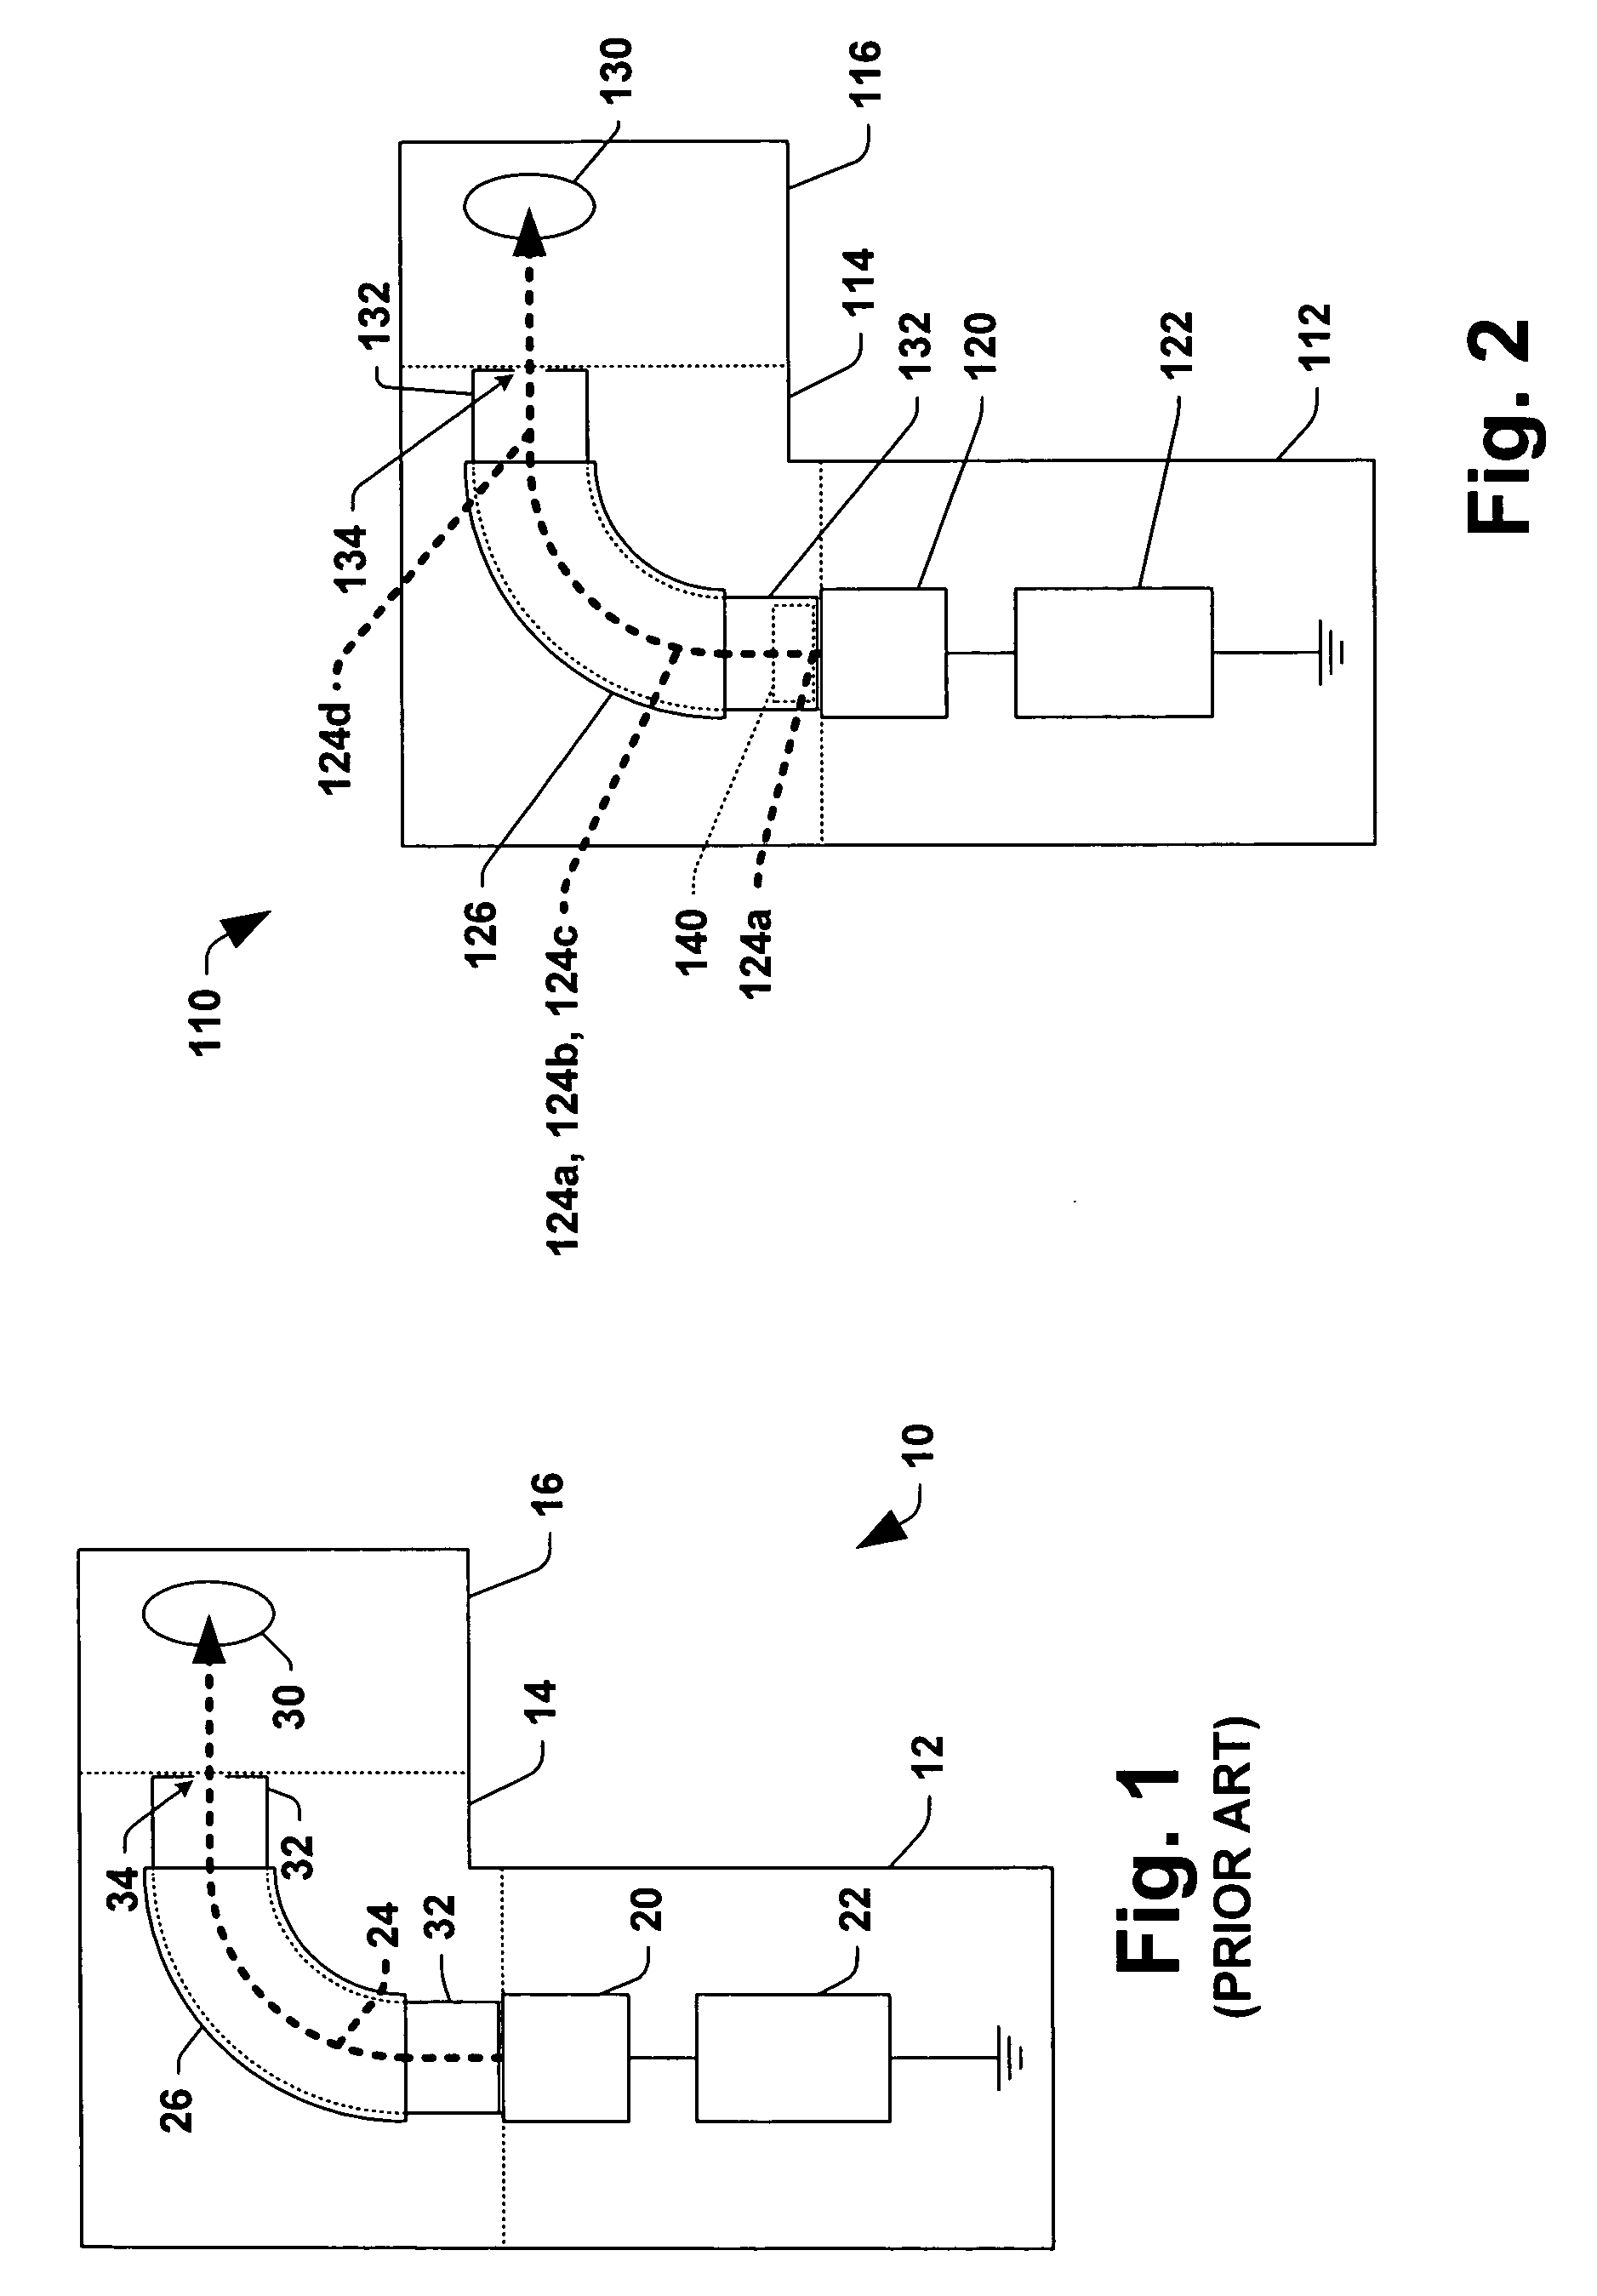 Method and apparatus for selective pre-dispersion of extracted ion beams in ion implantation systems